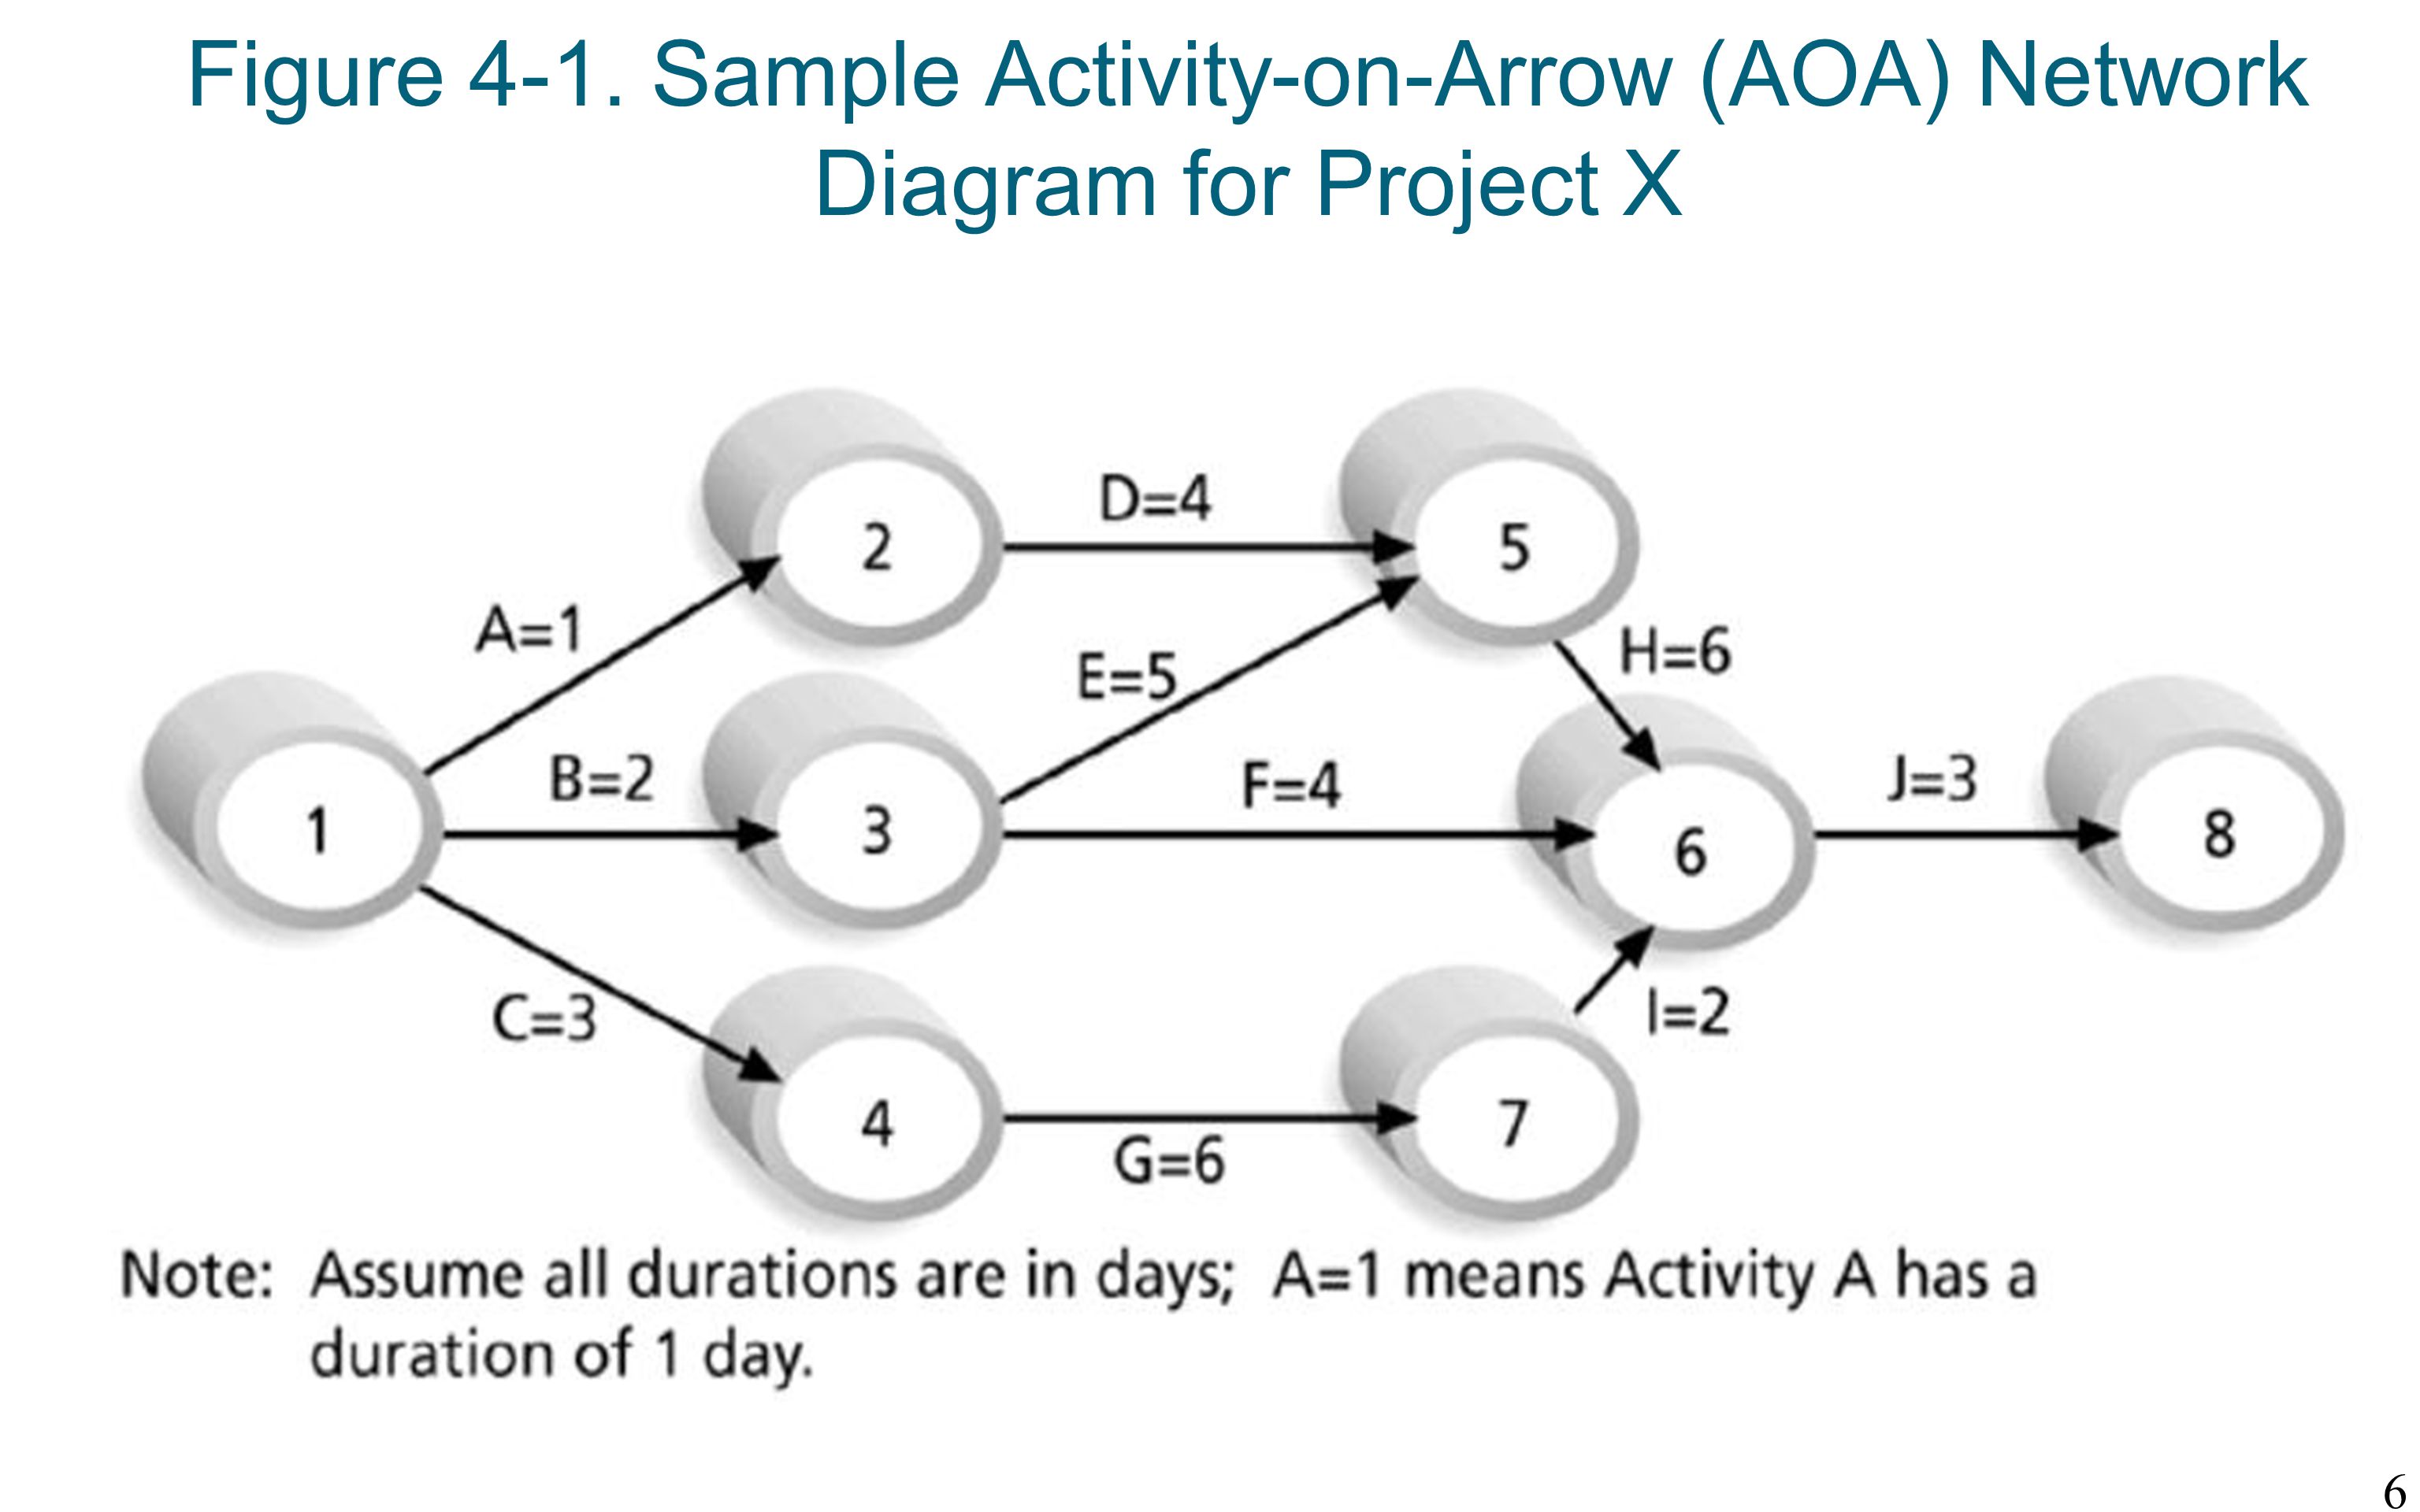 Figure 4-1. Sample Activity-on-Arrow (AOA) Network Diagram for Project X